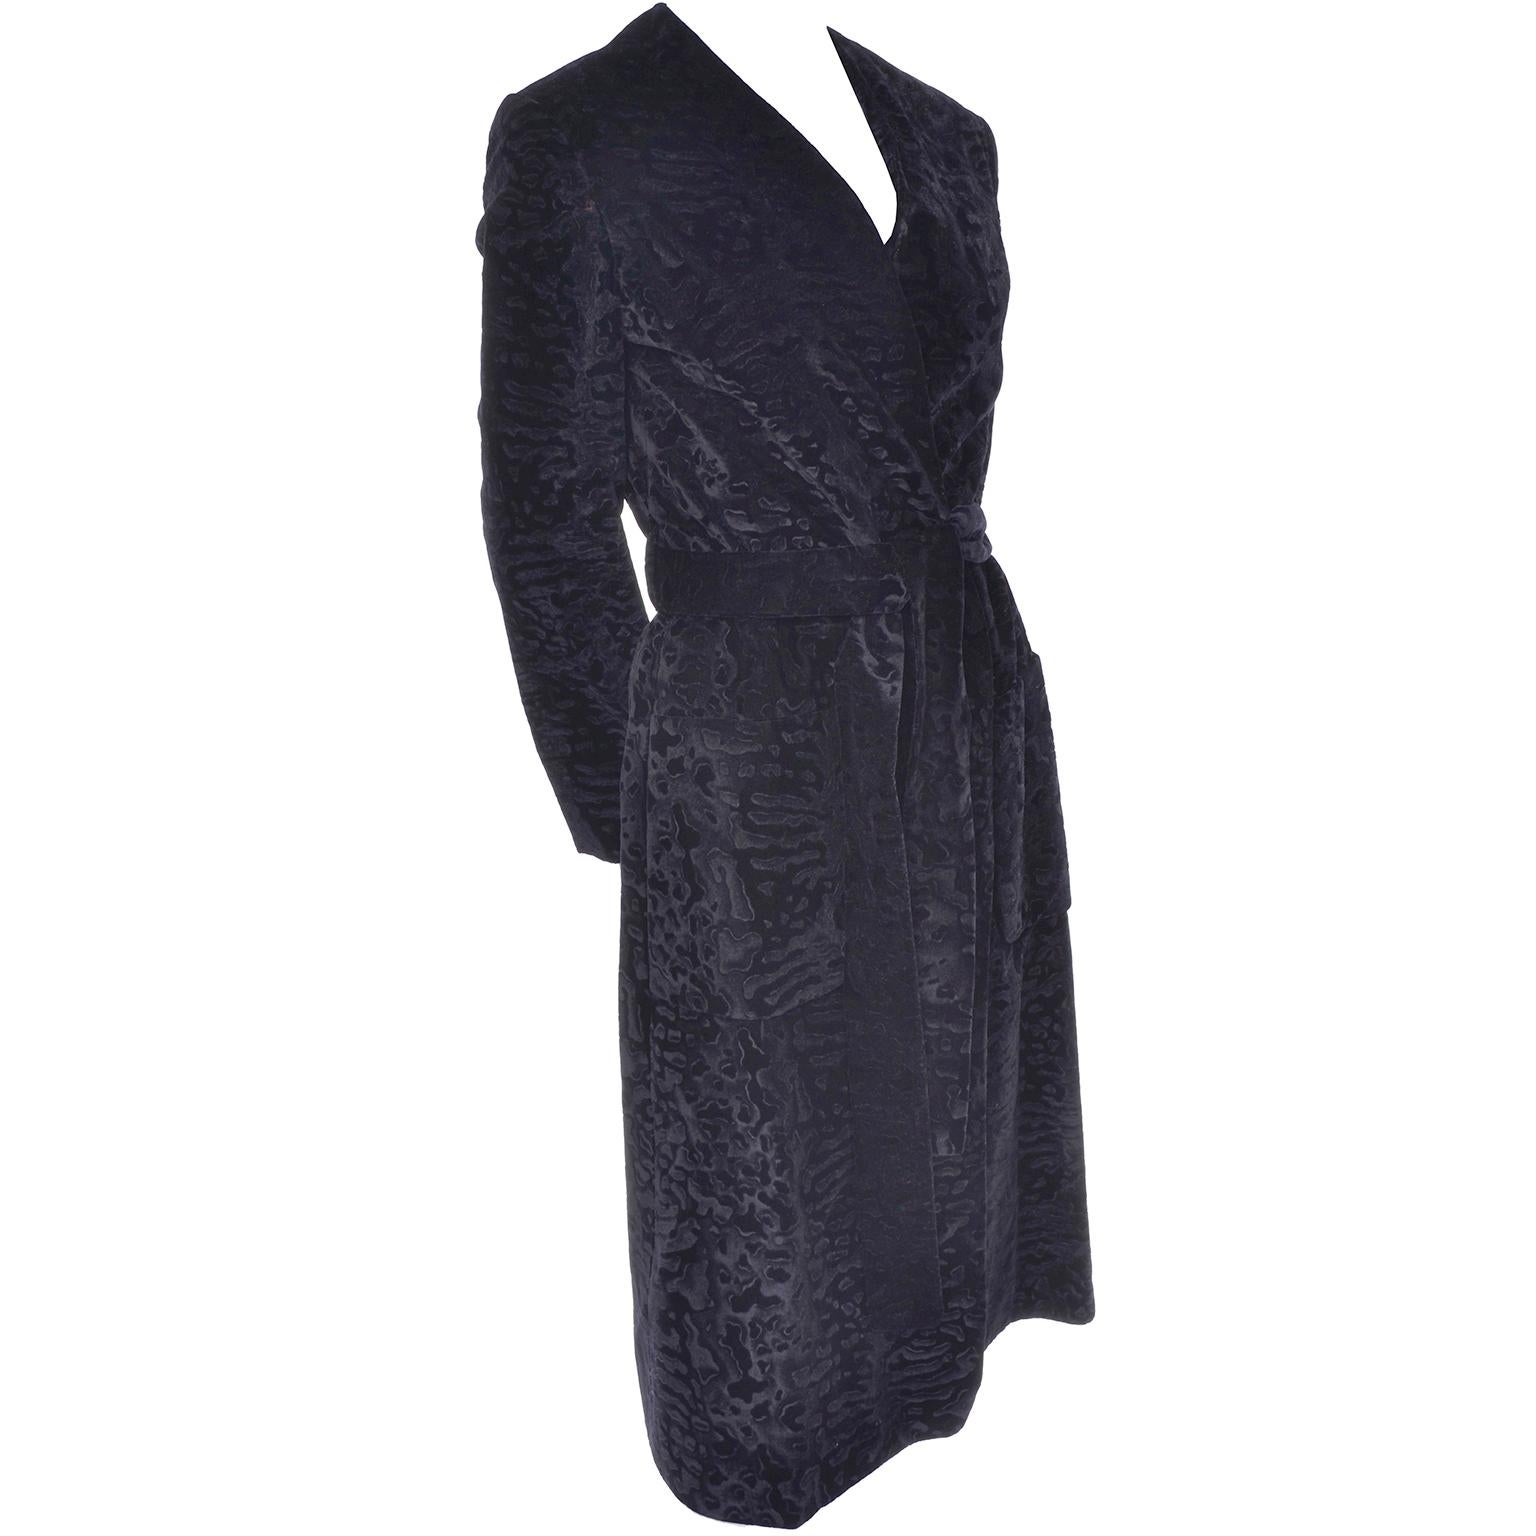 Bill Blass Vintage Coat in Black Flocked Velvet With Pockets and Belt In Excellent Condition For Sale In Portland, OR